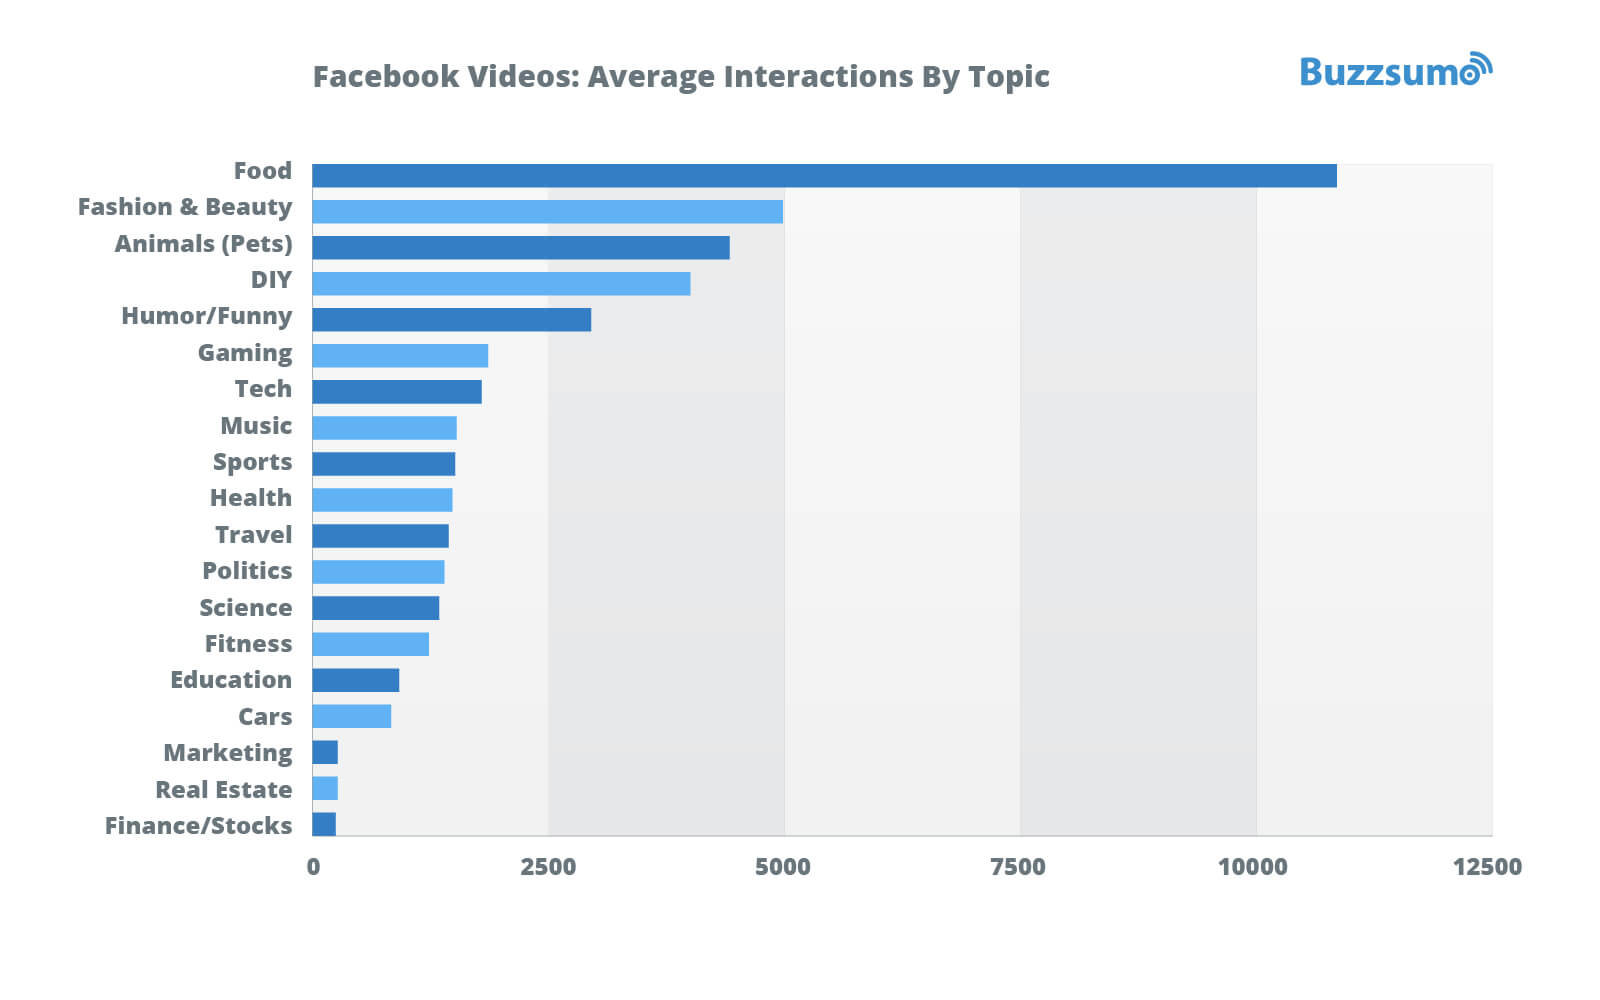 Facebook engagement videos average interaction by topic